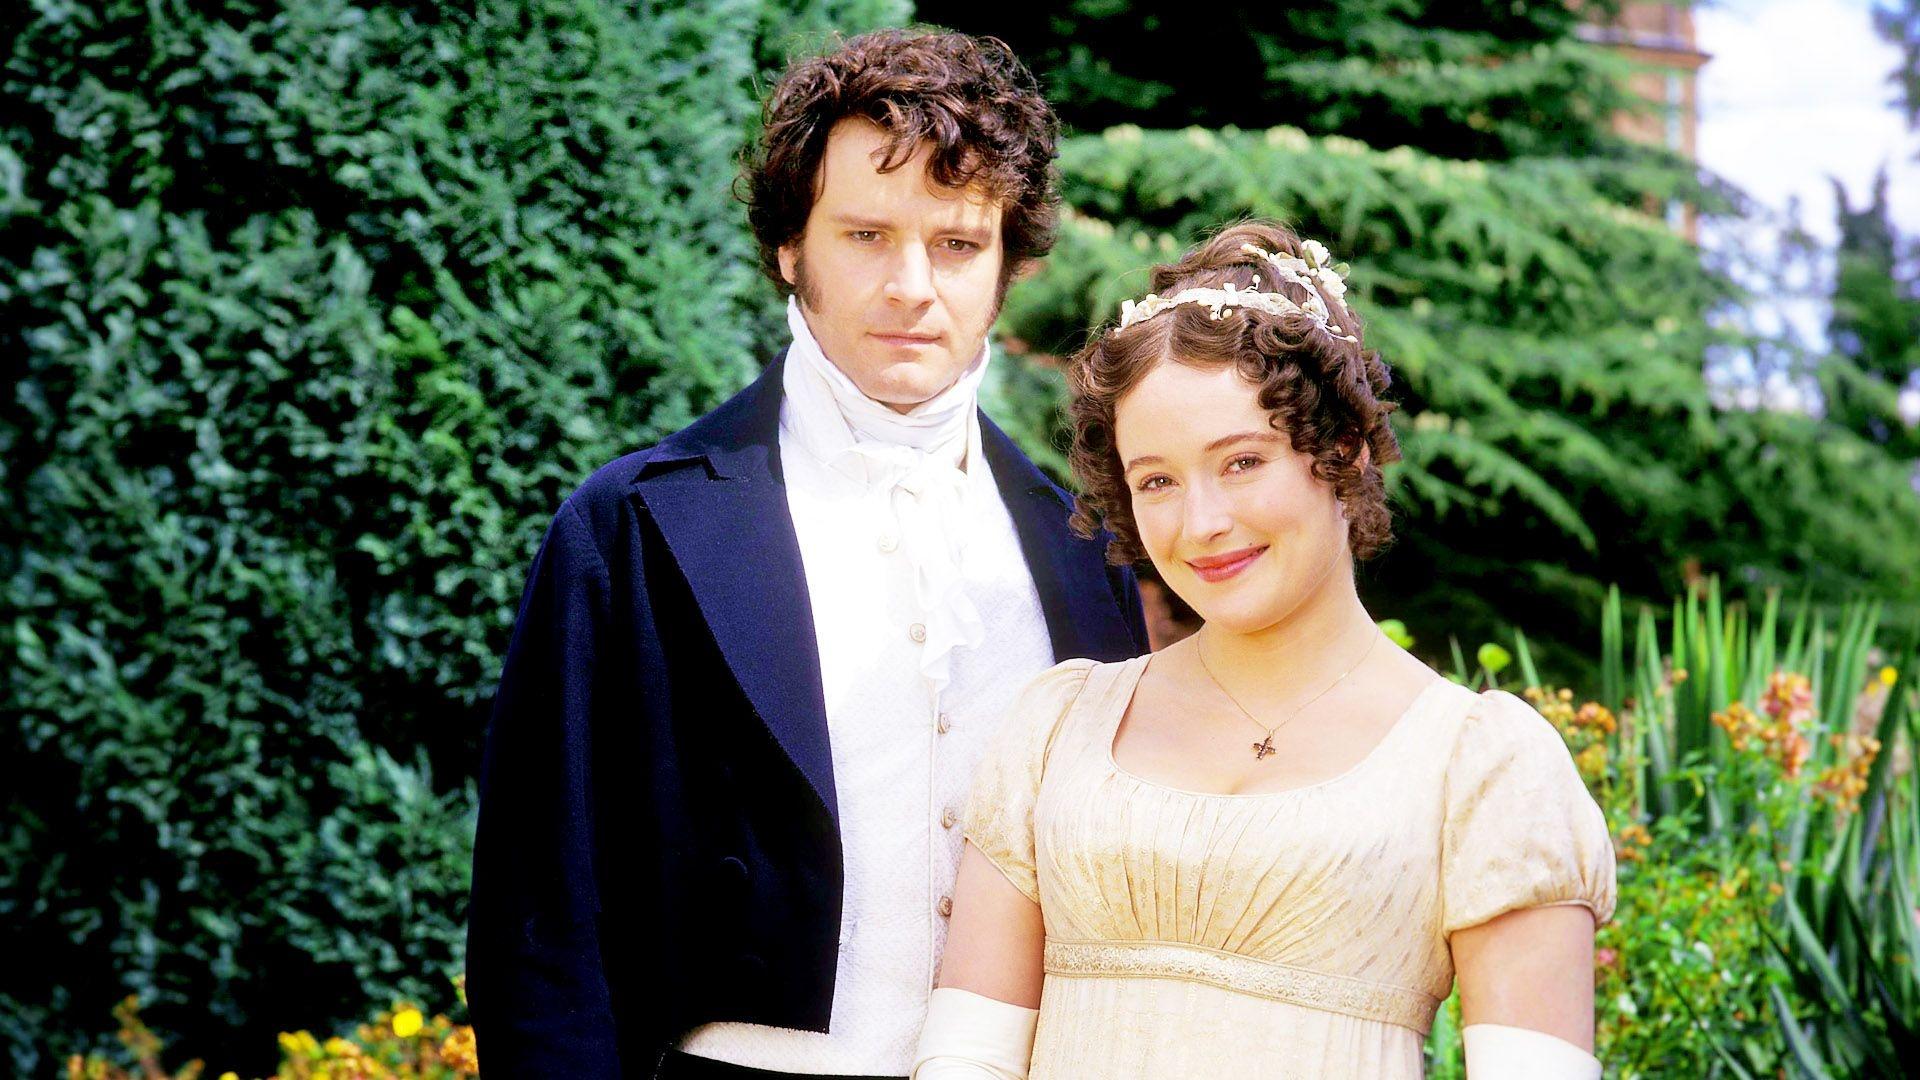 Colin Firth and Jennifer Ehle, pictured in a lovely garden, play Darcy and Elizabeth in the 1995 Pride and Prejudice.